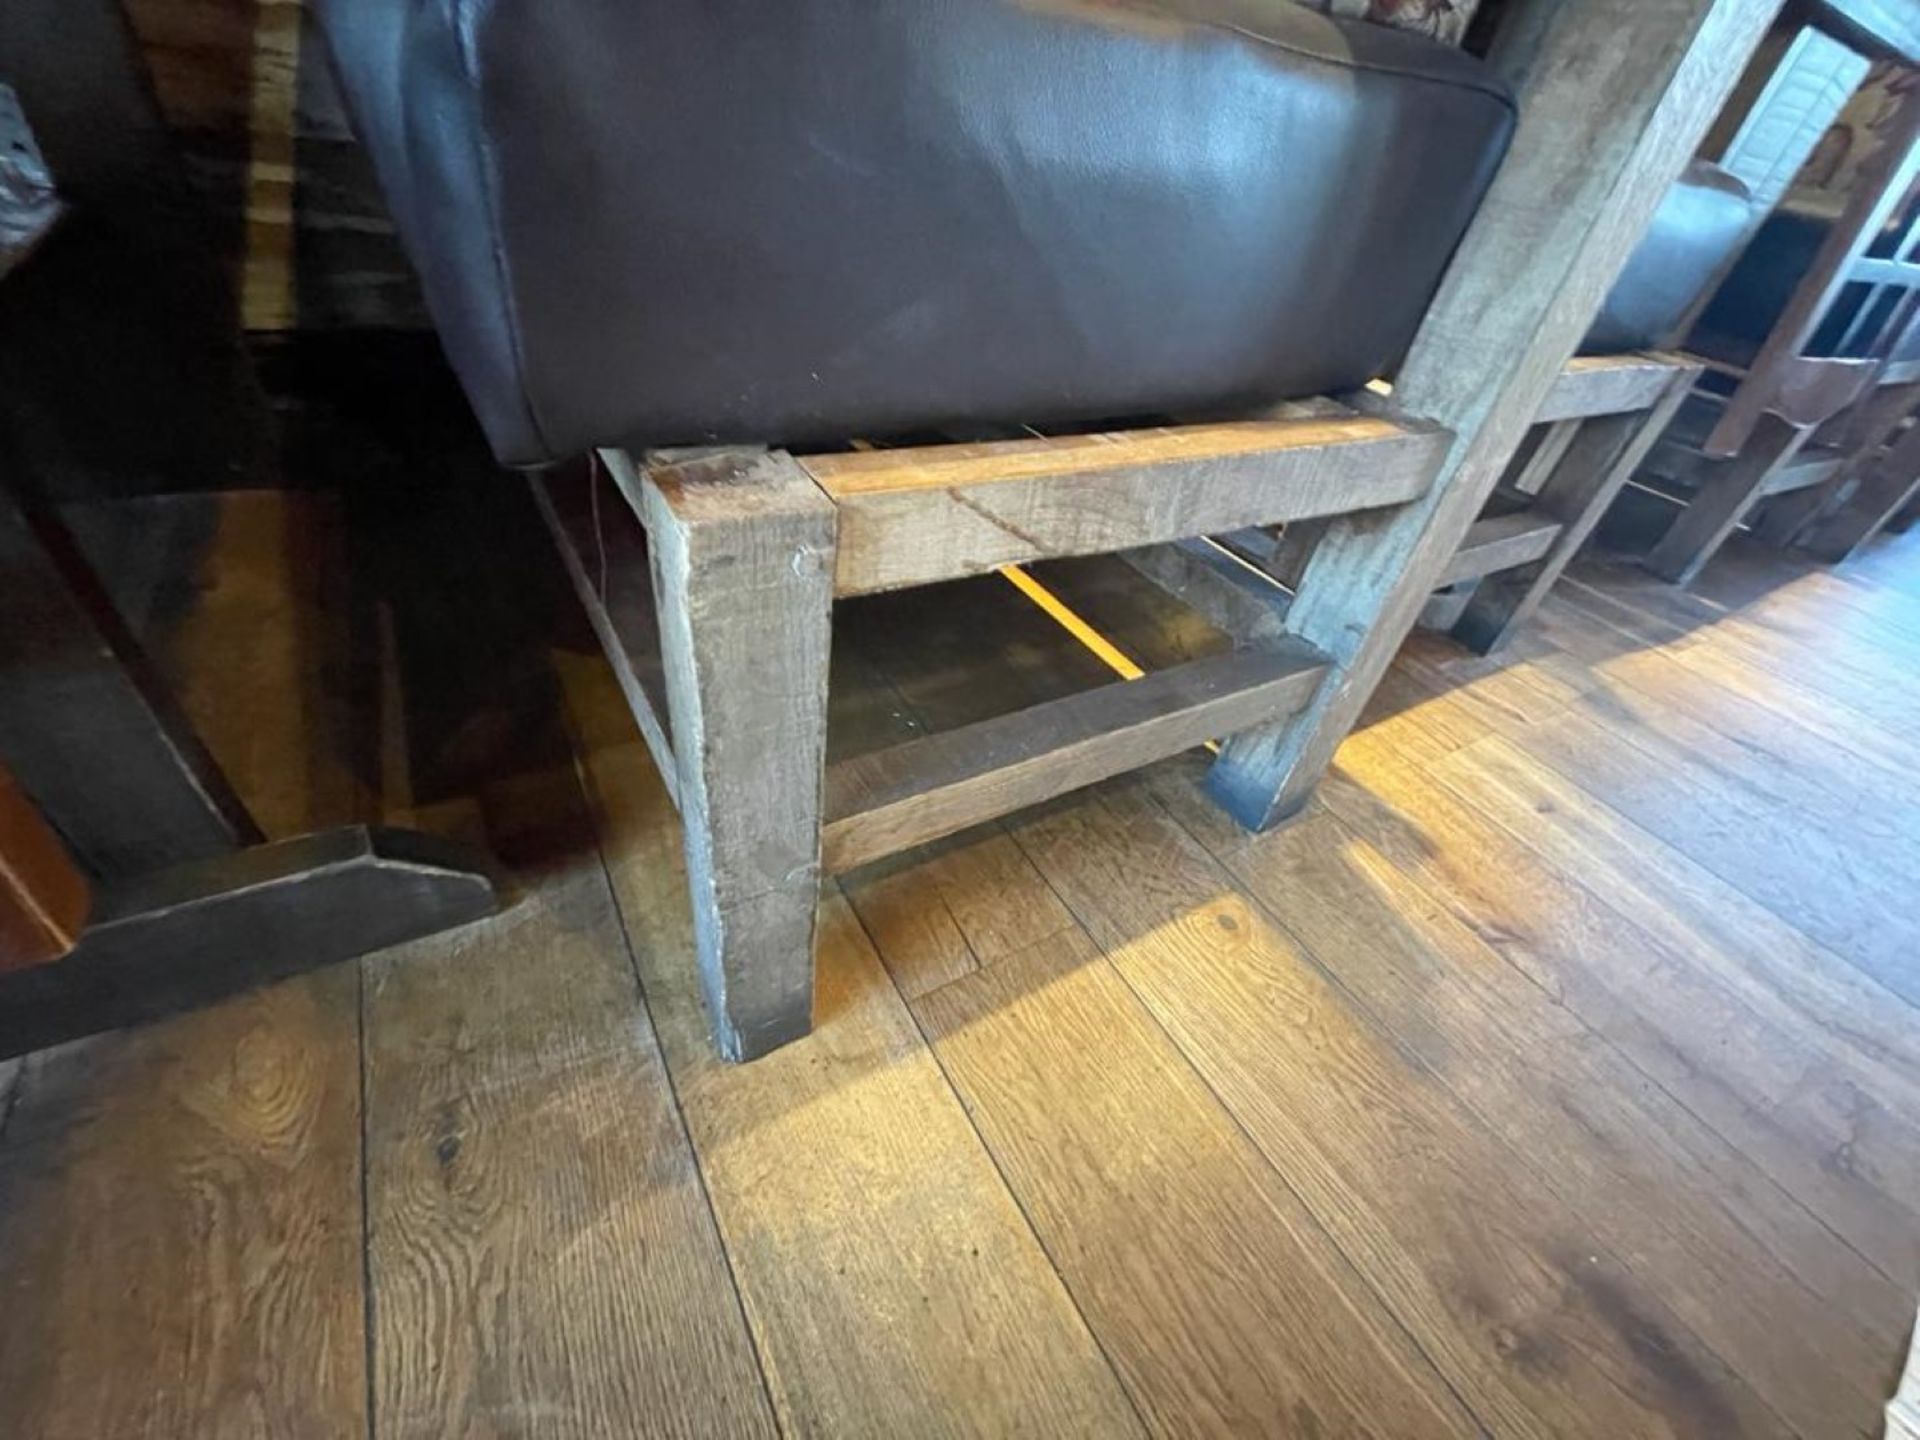 2 x Handcrafted Solid Wood Seating Benches With a Rustic Farmhouse Dining Table - Features Brown - Image 3 of 13